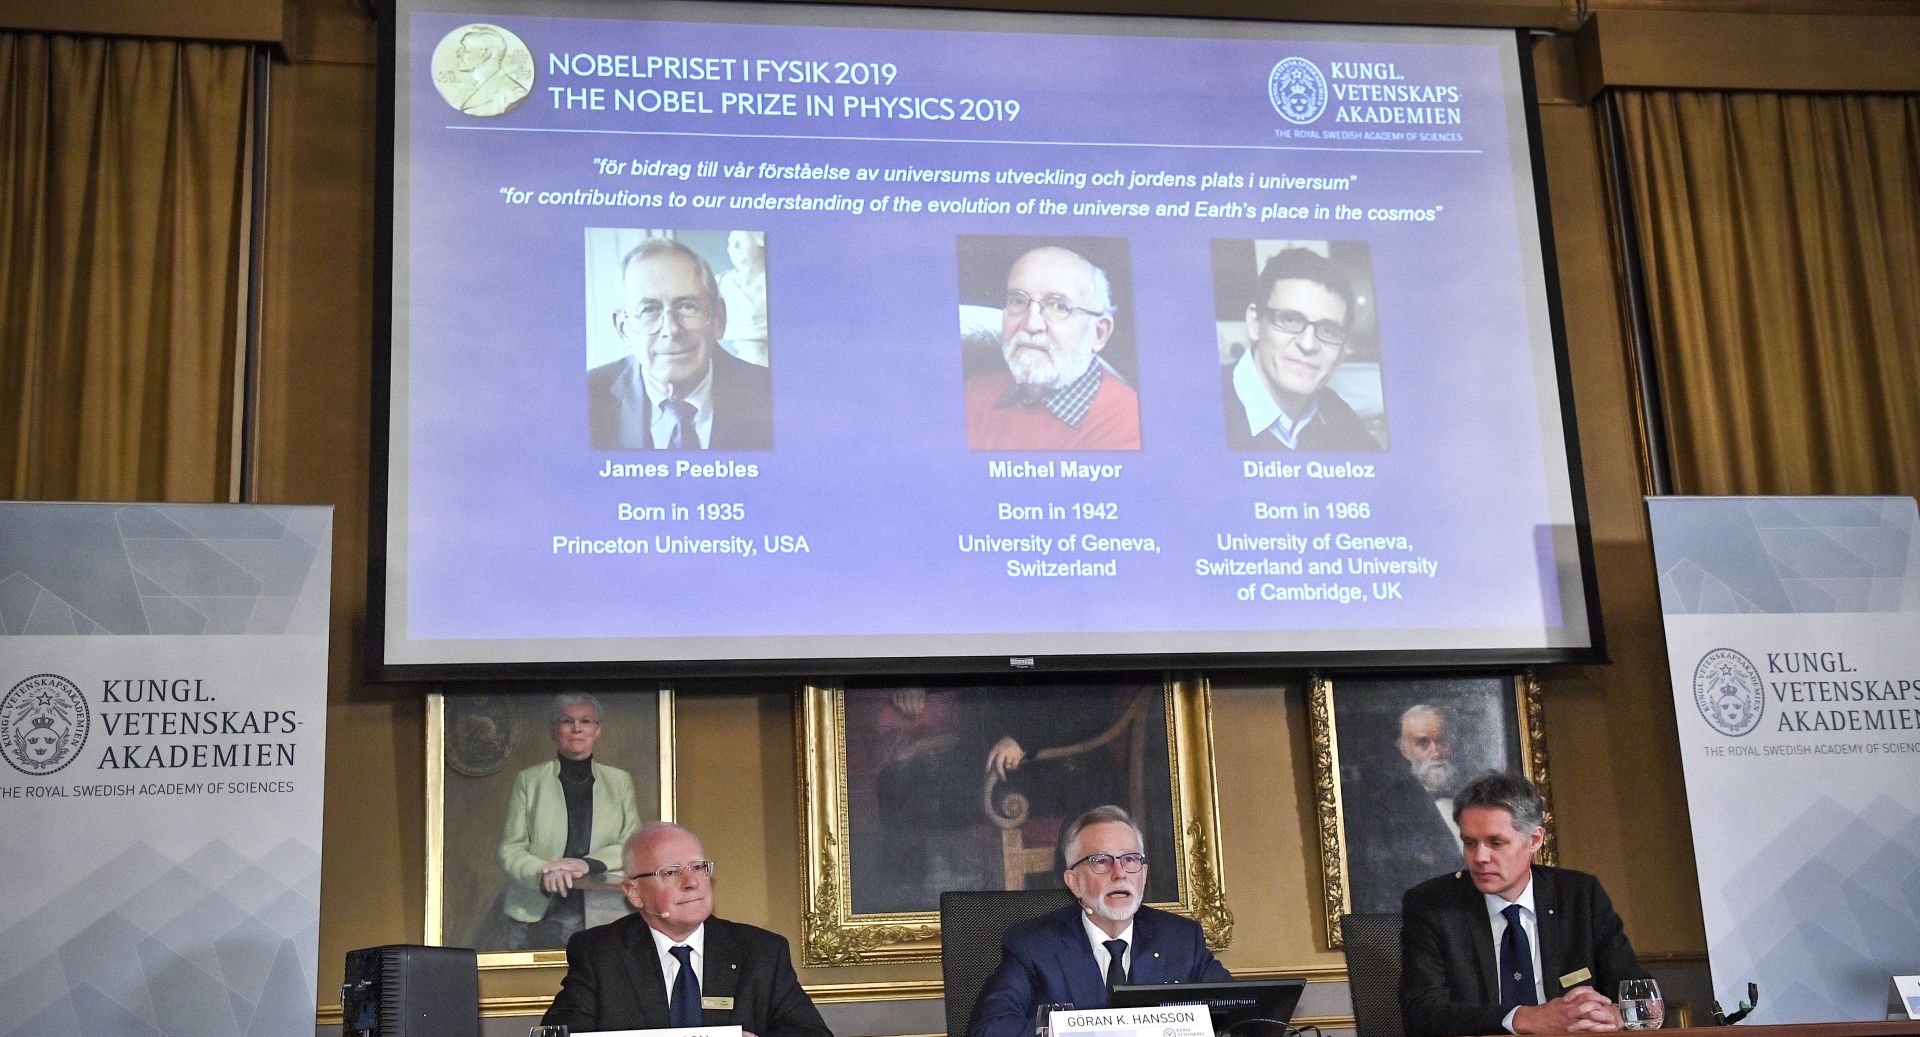 epa07905122 Goran K. Hansson (C), Secretary General of the Royal Swedish Academy of Sciences, and academy members Mats Larsson (L) and Ulf Danielsson, announce whe winners of the 2019 Nobel Prize in Physics at the Royal Swedish Academy of Sciences in Stockholm, Sweden, 08 October 2019. The 2019 Nobel Prize in Physics is awarded to US-Canadian scientist James Peebles and Swiss scientists Michel Mayor and Didier Queloz.  EPA/Claudio Bresciani